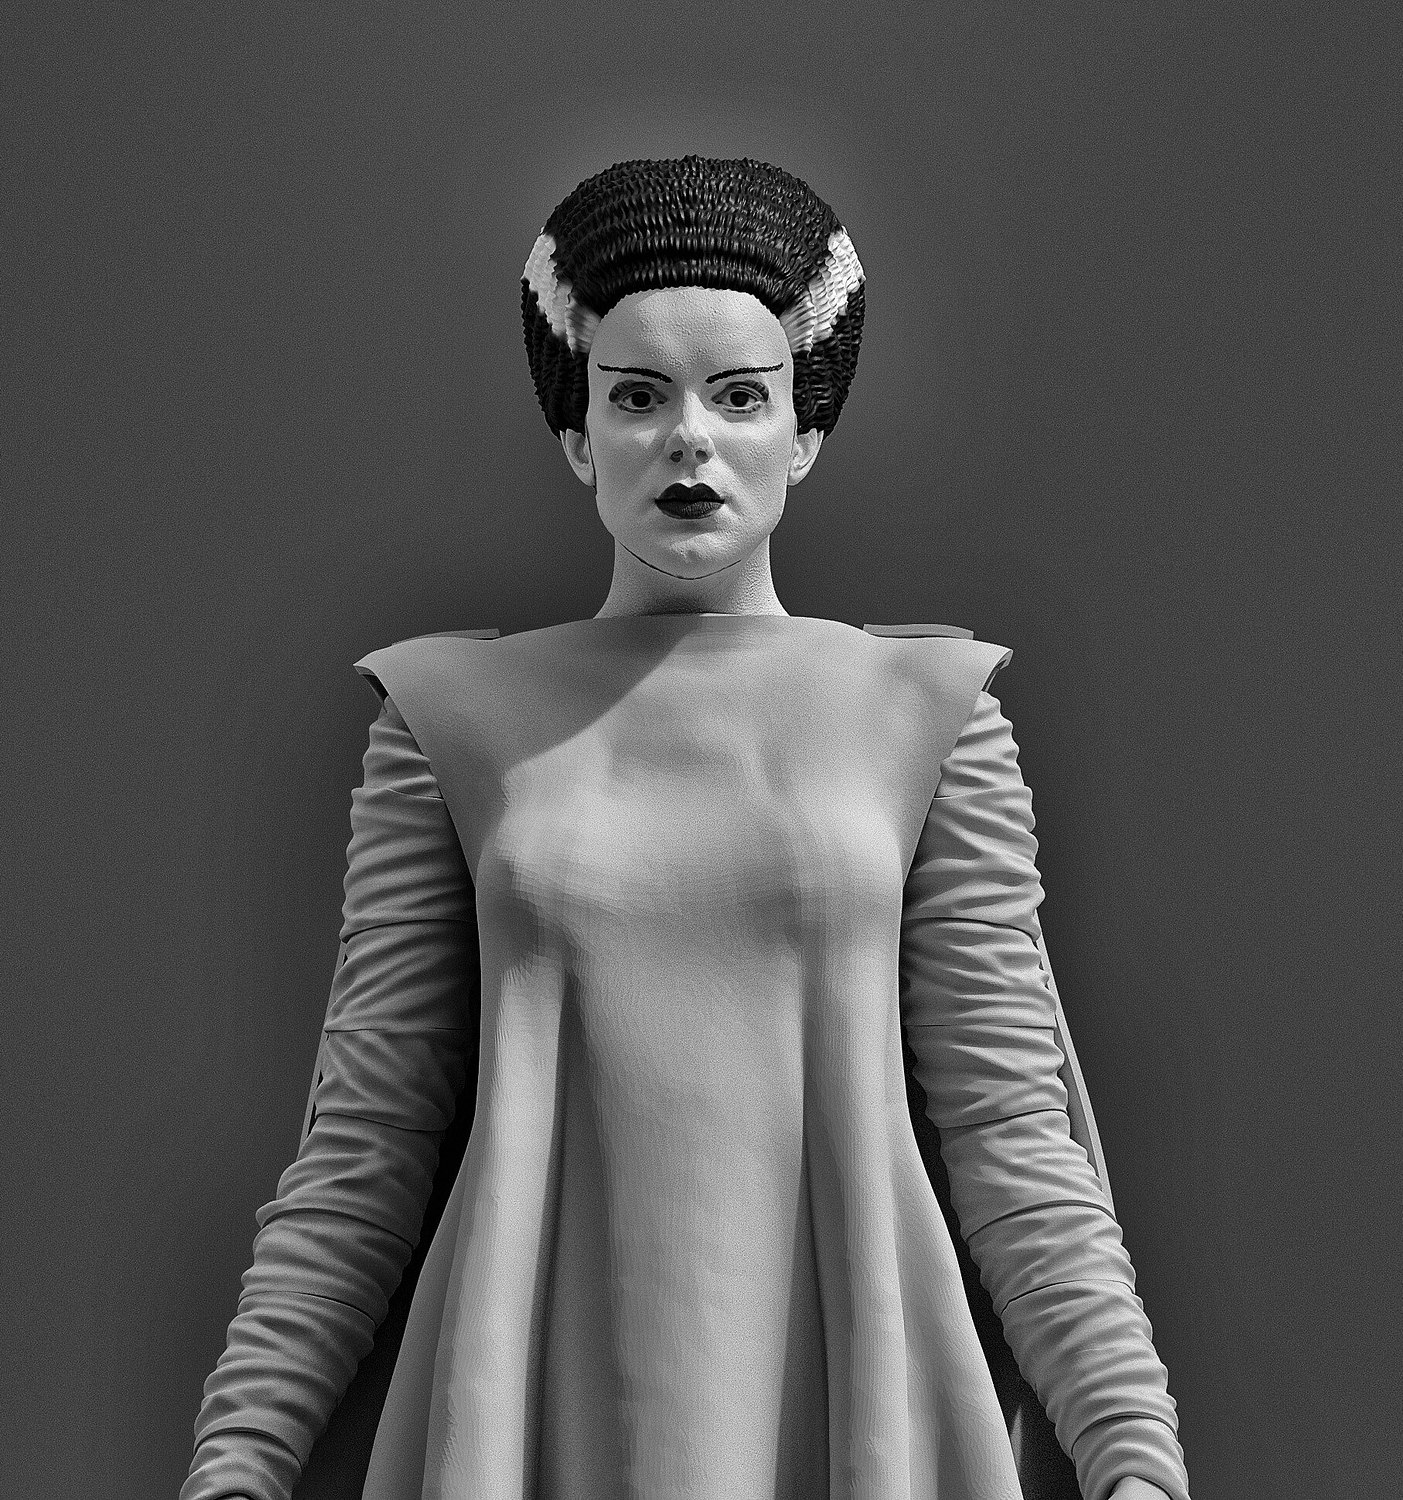 Bride of Frankenstein From Classic Monsters